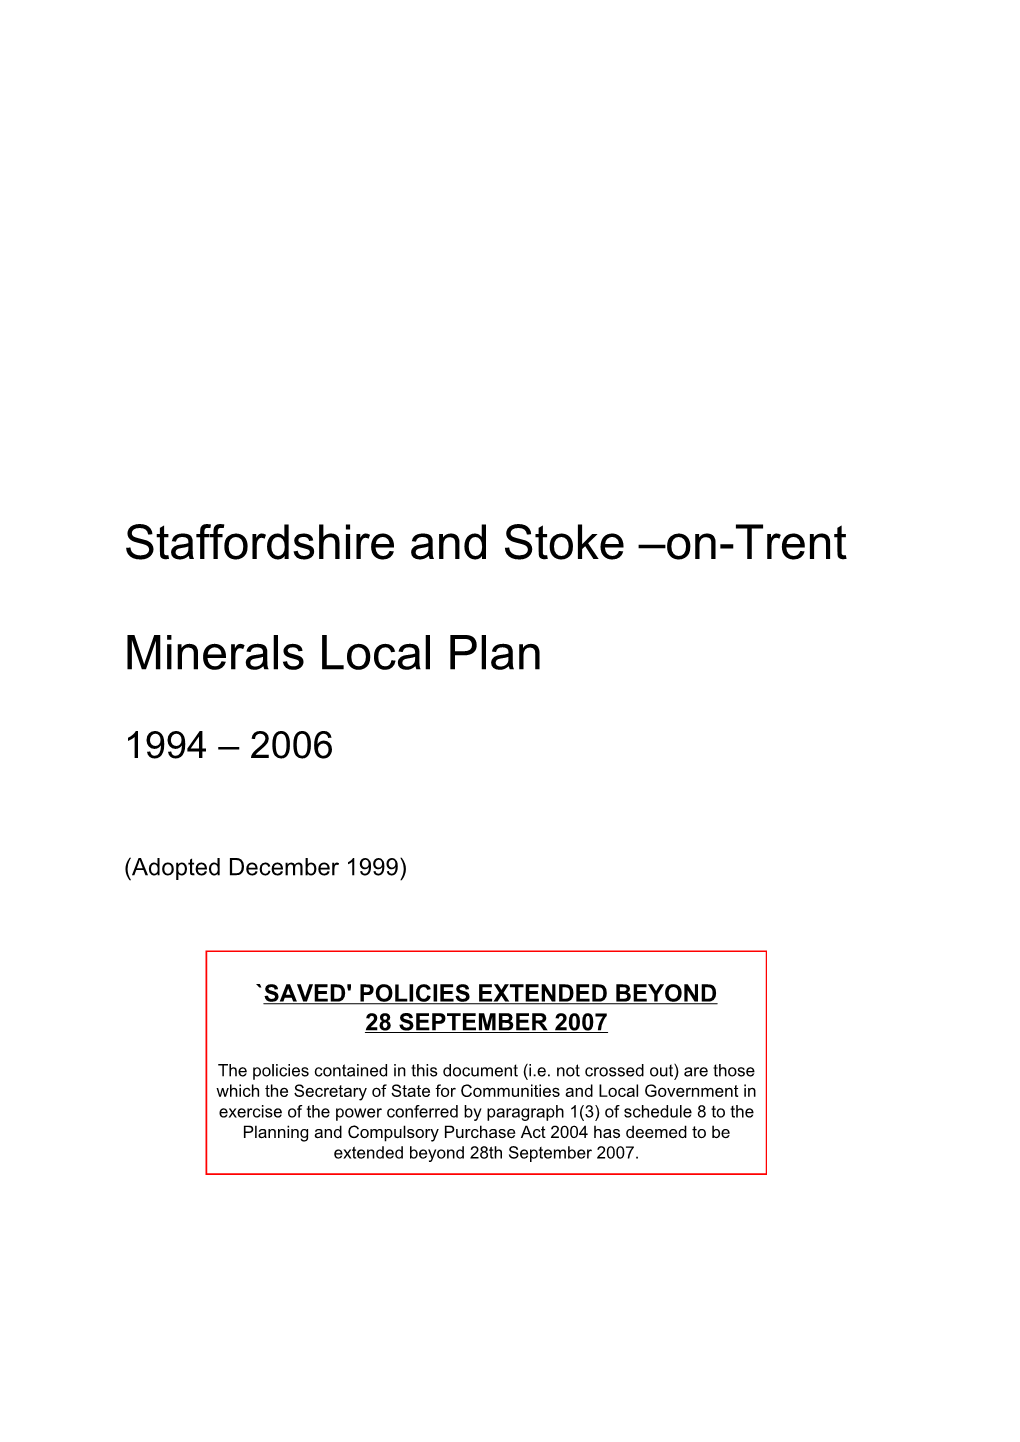 Staffordshire and Stoke-On-Trent Minerals Local Plan 1994